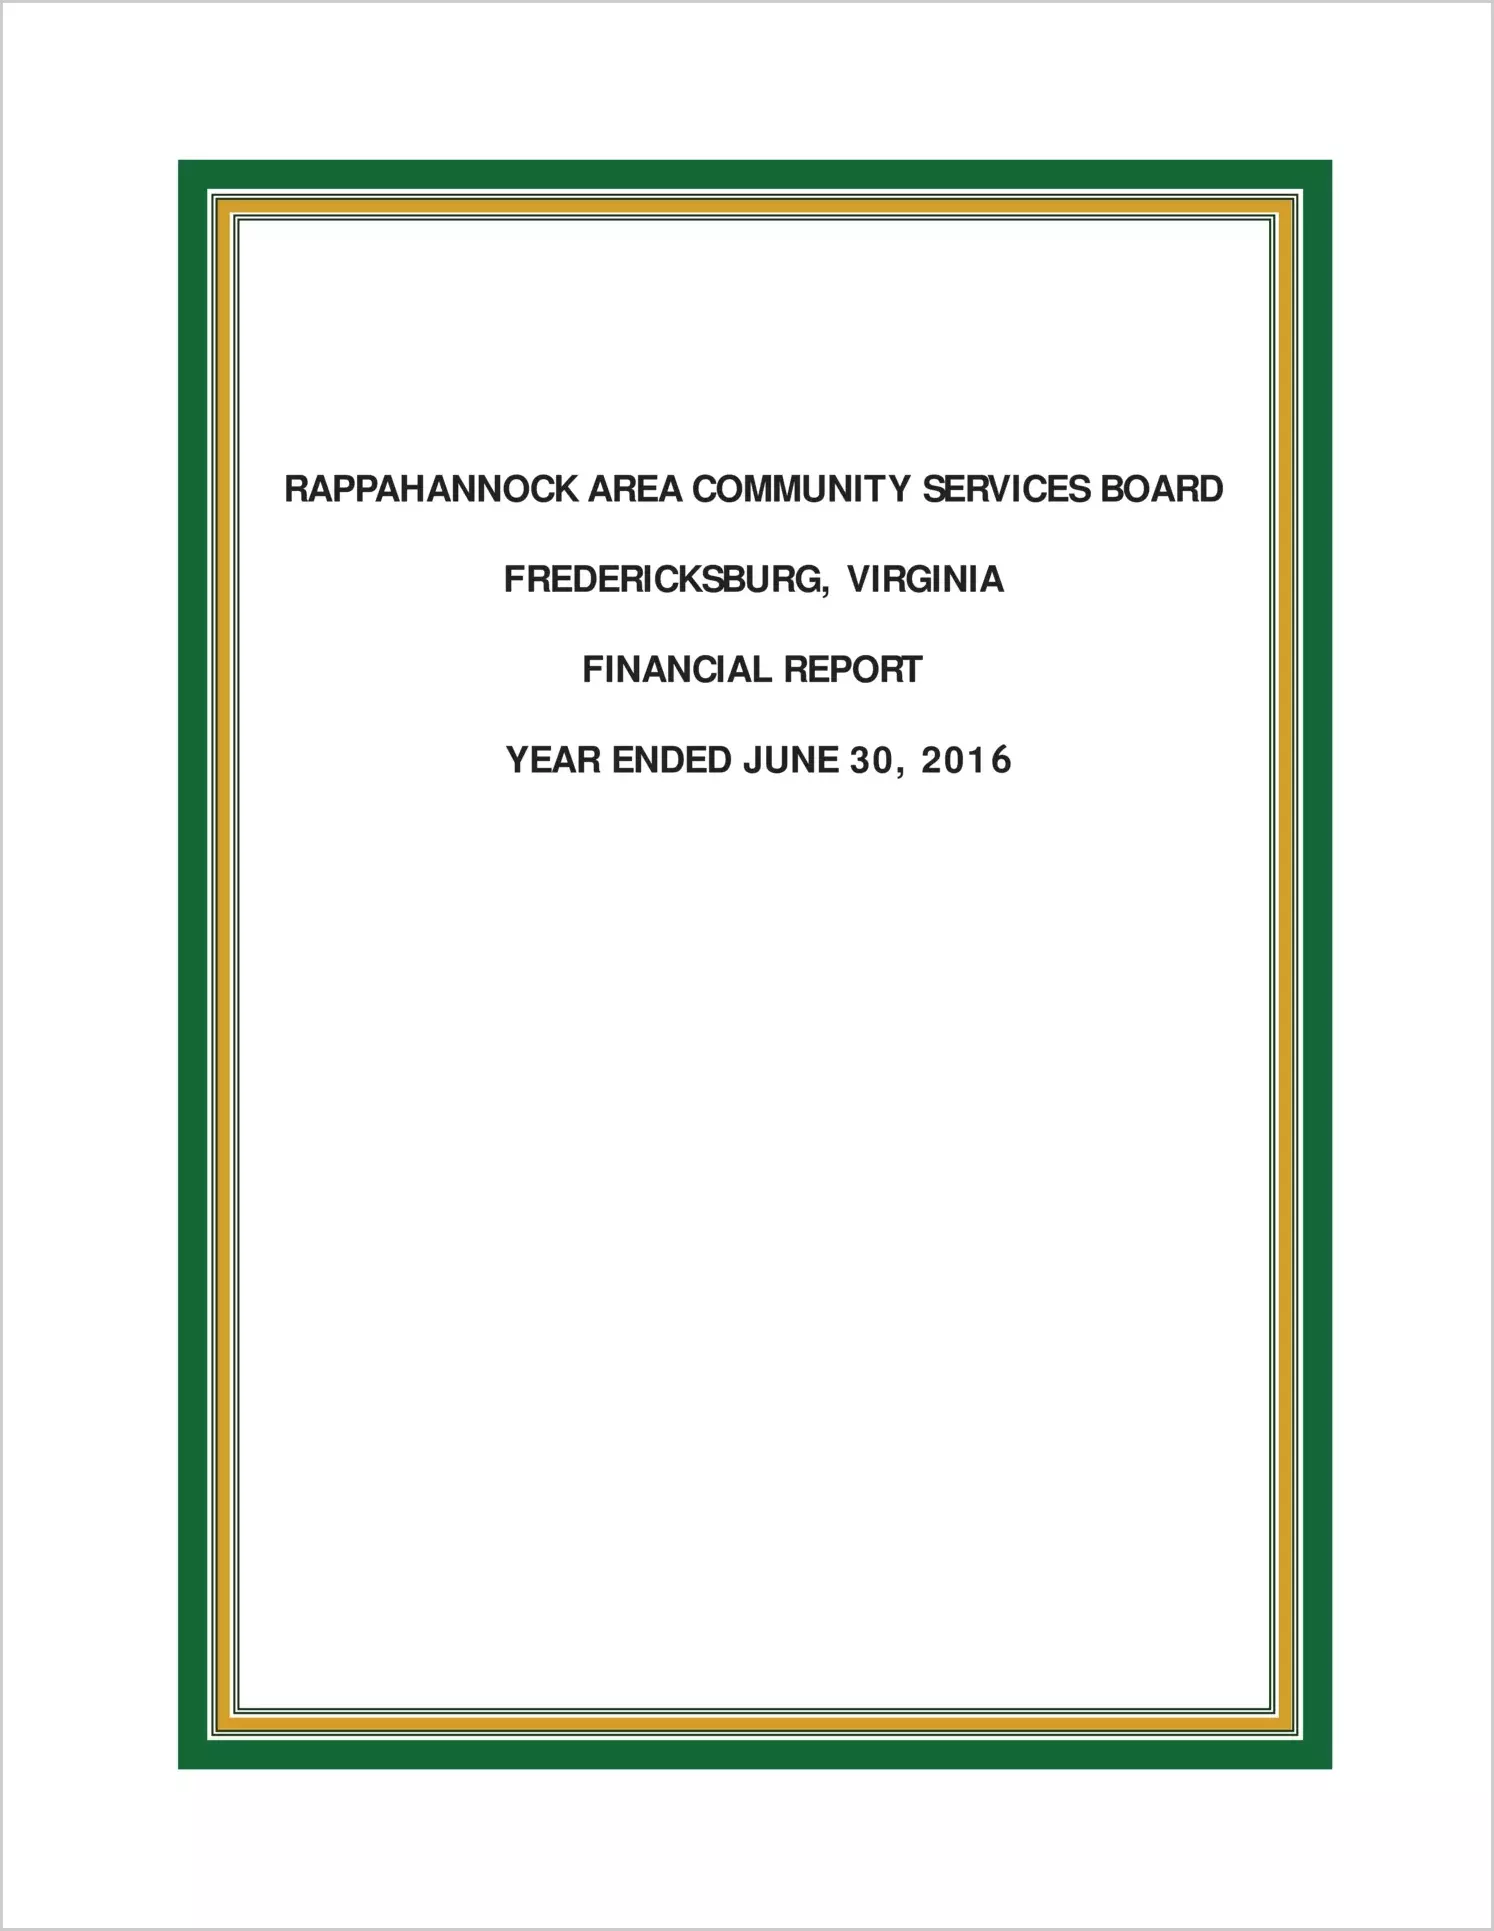 2016 ABC/Other Annual Financial Report  for Rappahannock Area Community Services Board